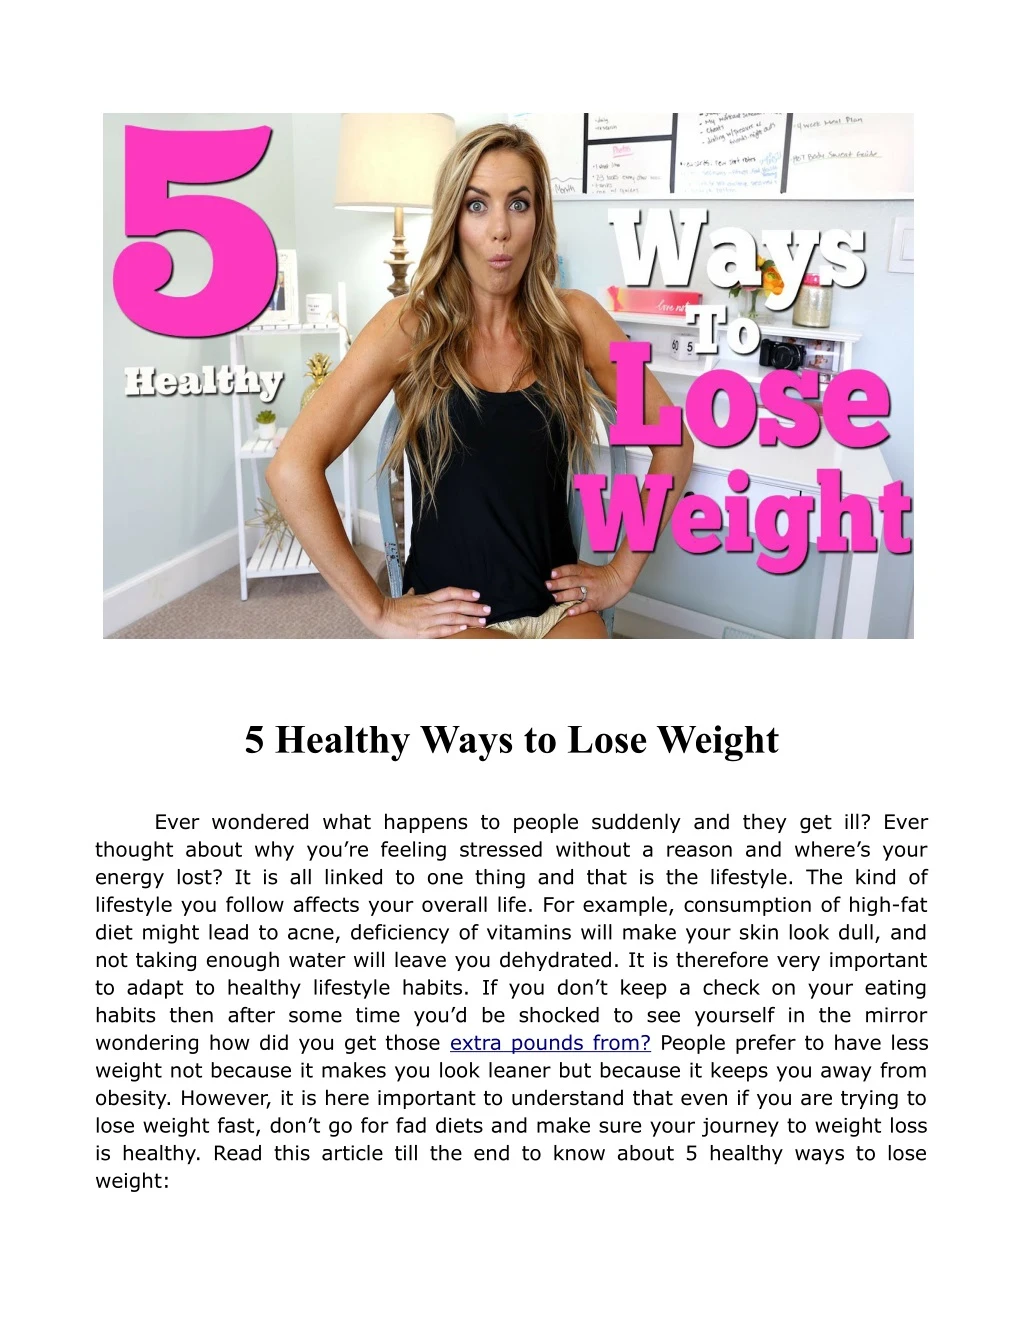 5 healthy ways to lose weight